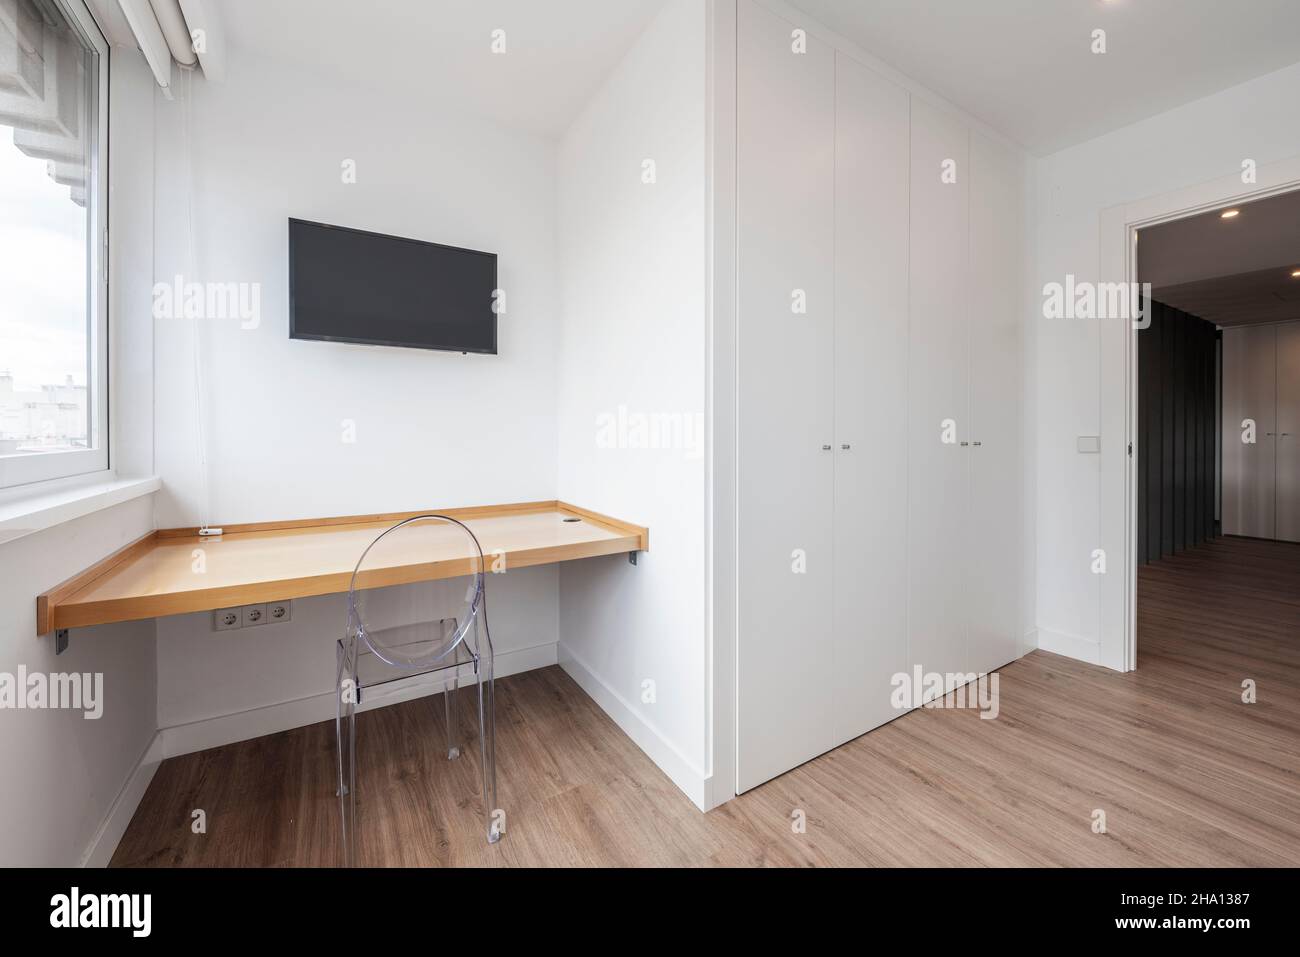 Room with desk, small plasma TV, white built-in wardrobe and oak parquet floors Stock Photo